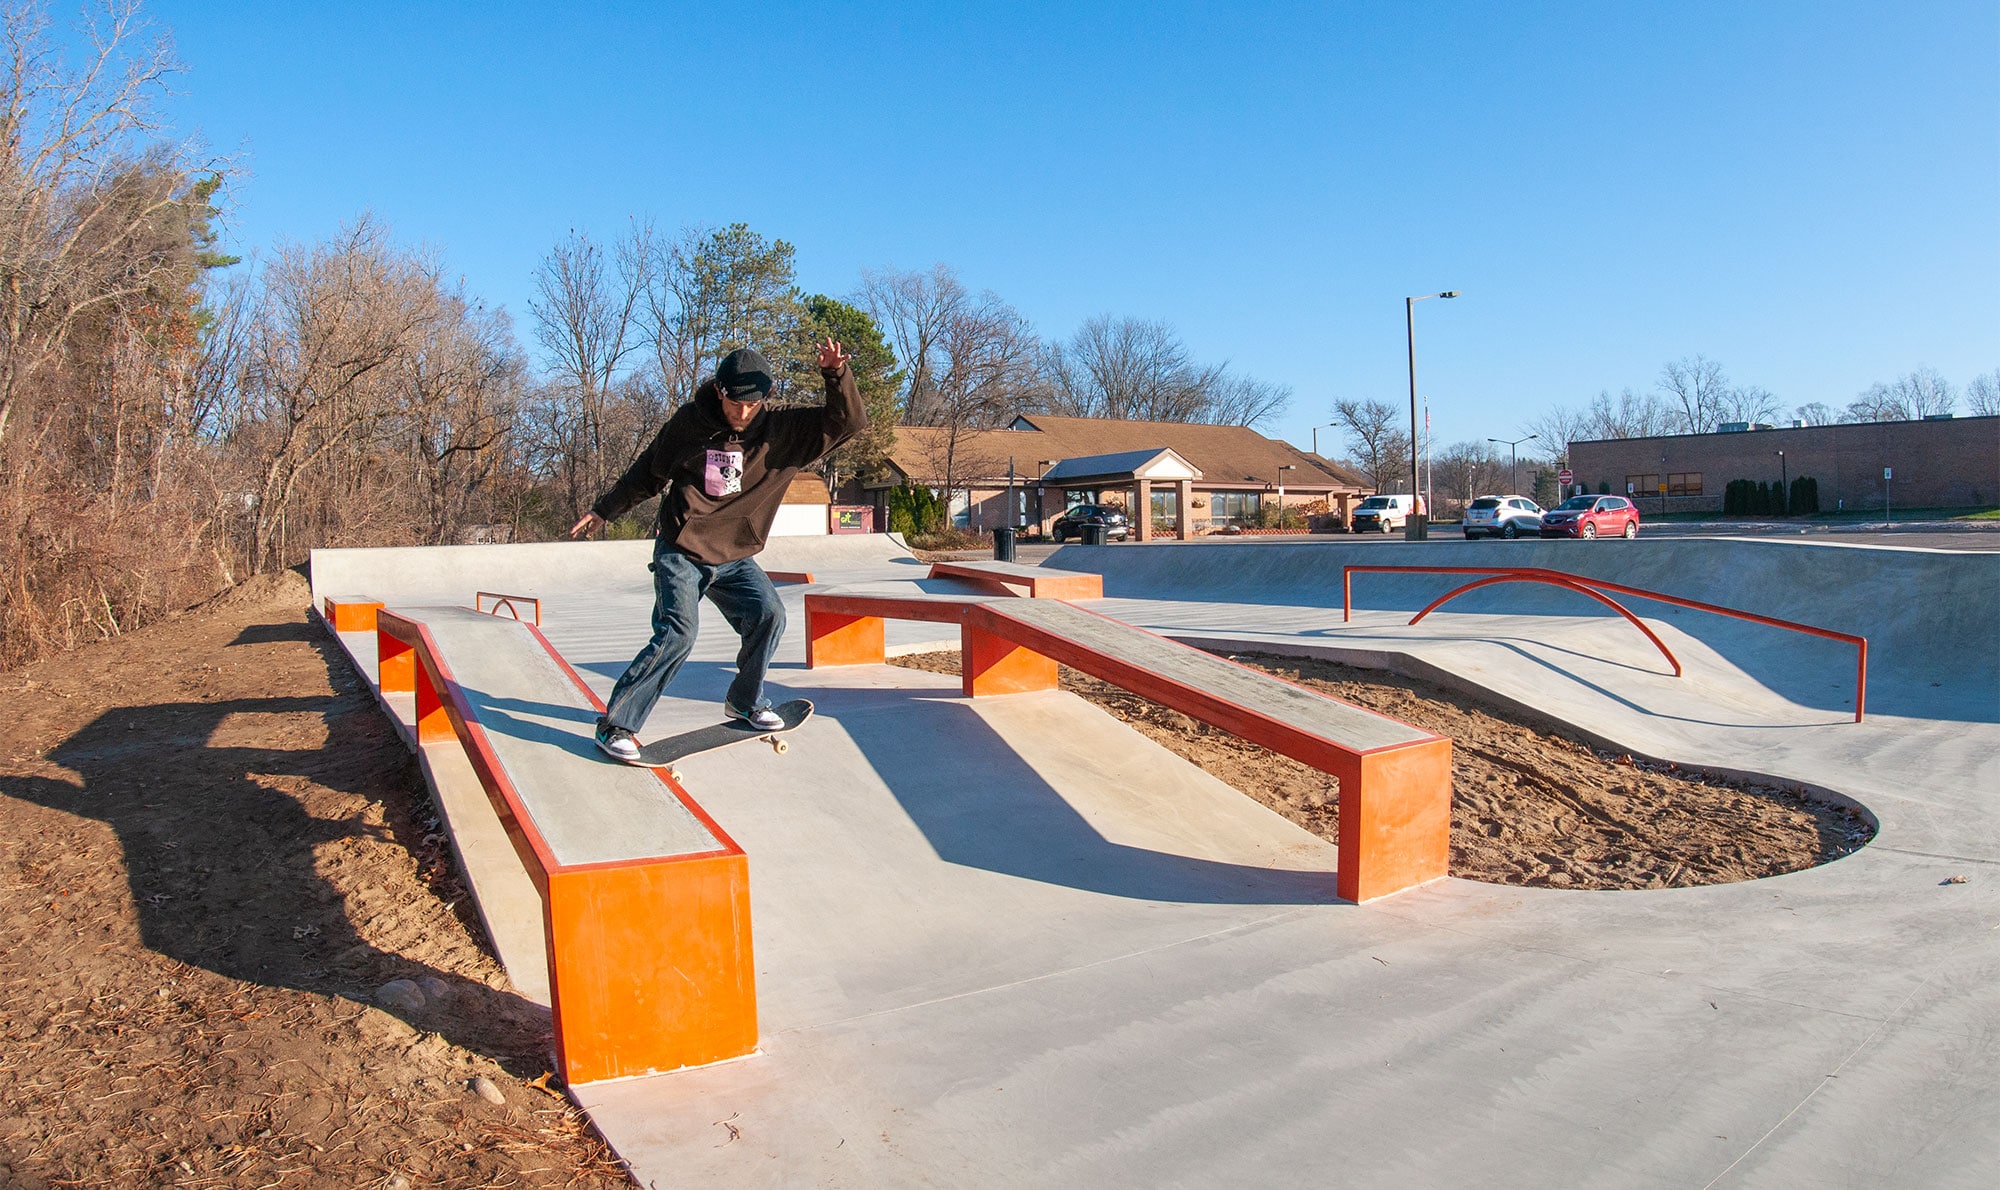 Frontside Tailslide on the hubba at a Spohn Ranch Skatepark located in Milford Michigan